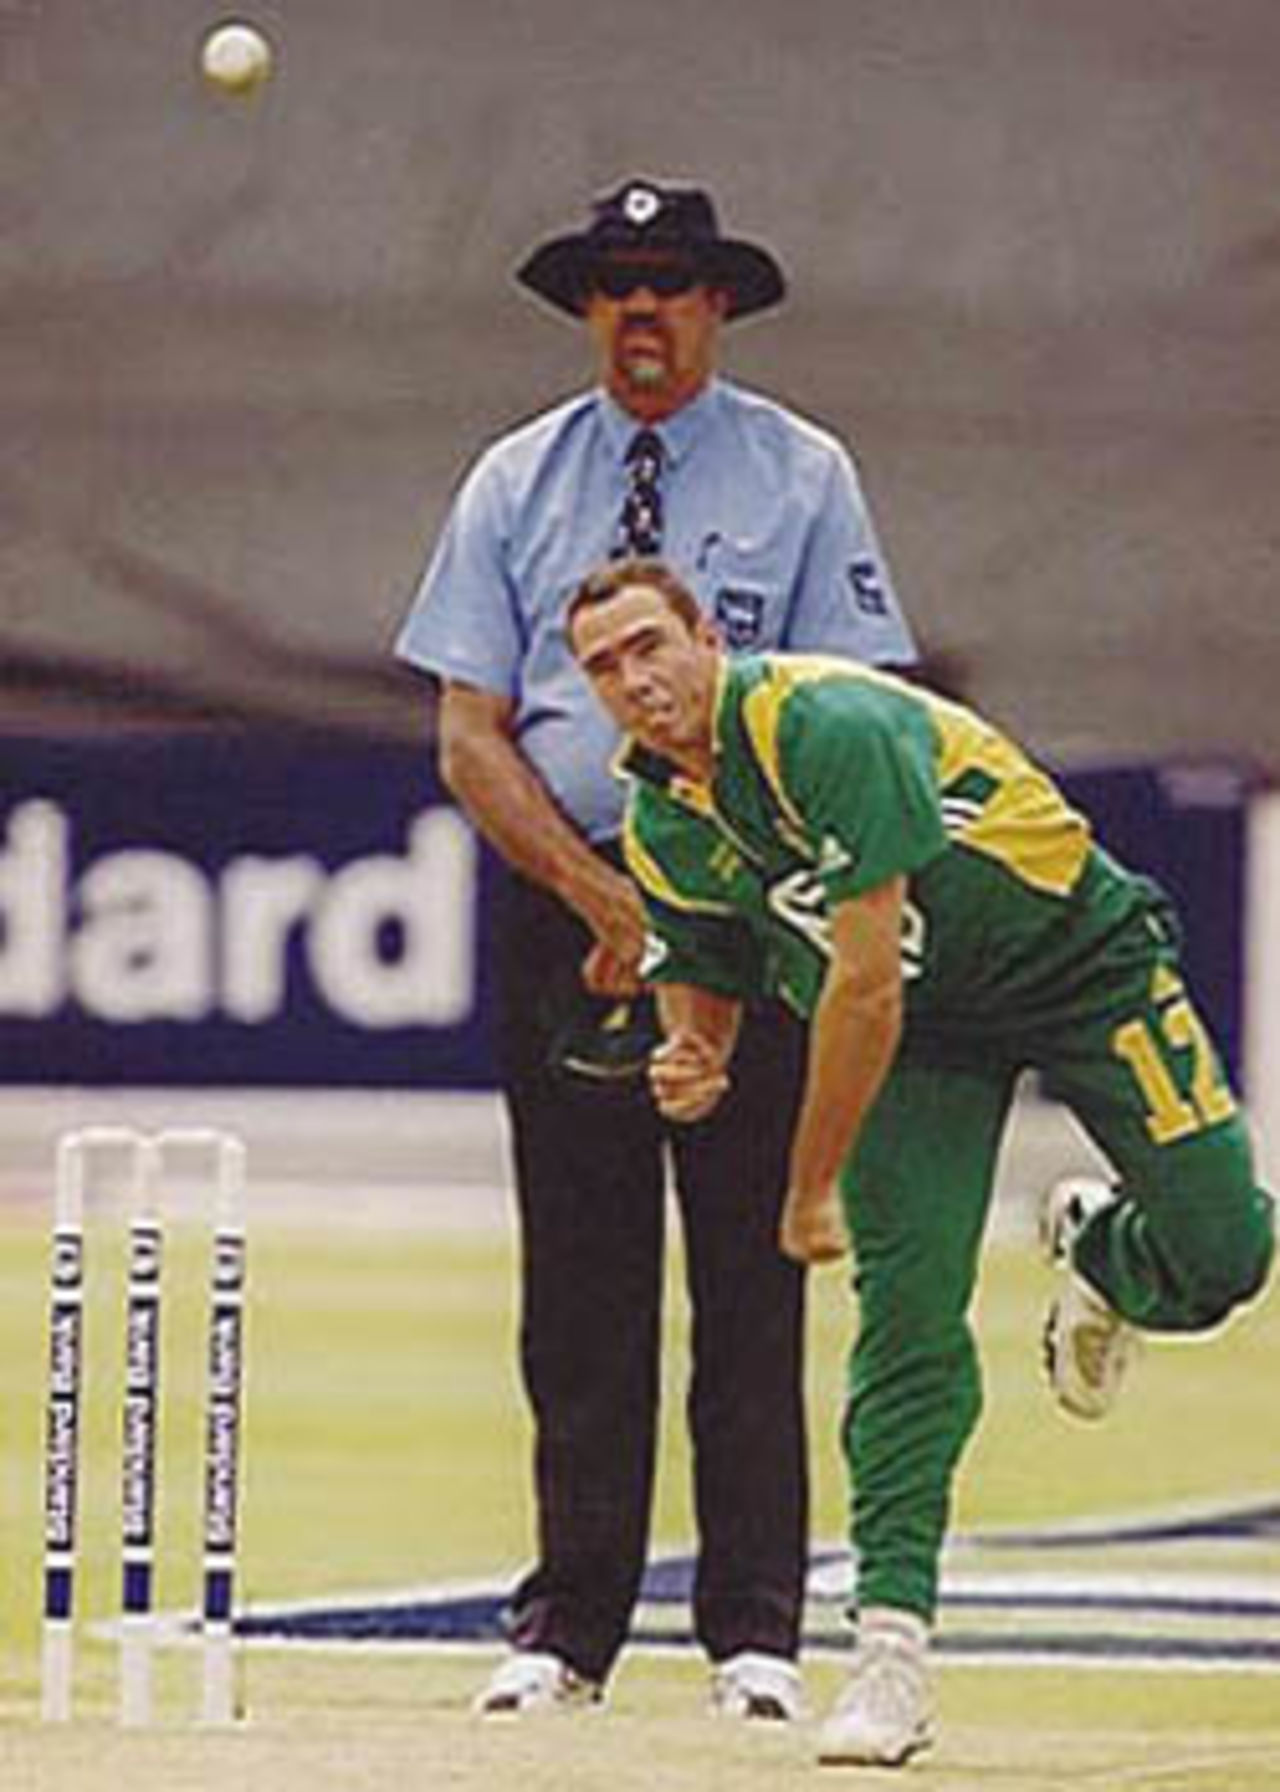 Nicky Boje delivers, New Zealand in South Africa 2000/01, 2nd One-Day International, South Africa v New Zealand, Willowmoore Park, Benoni, 22 October 2000.